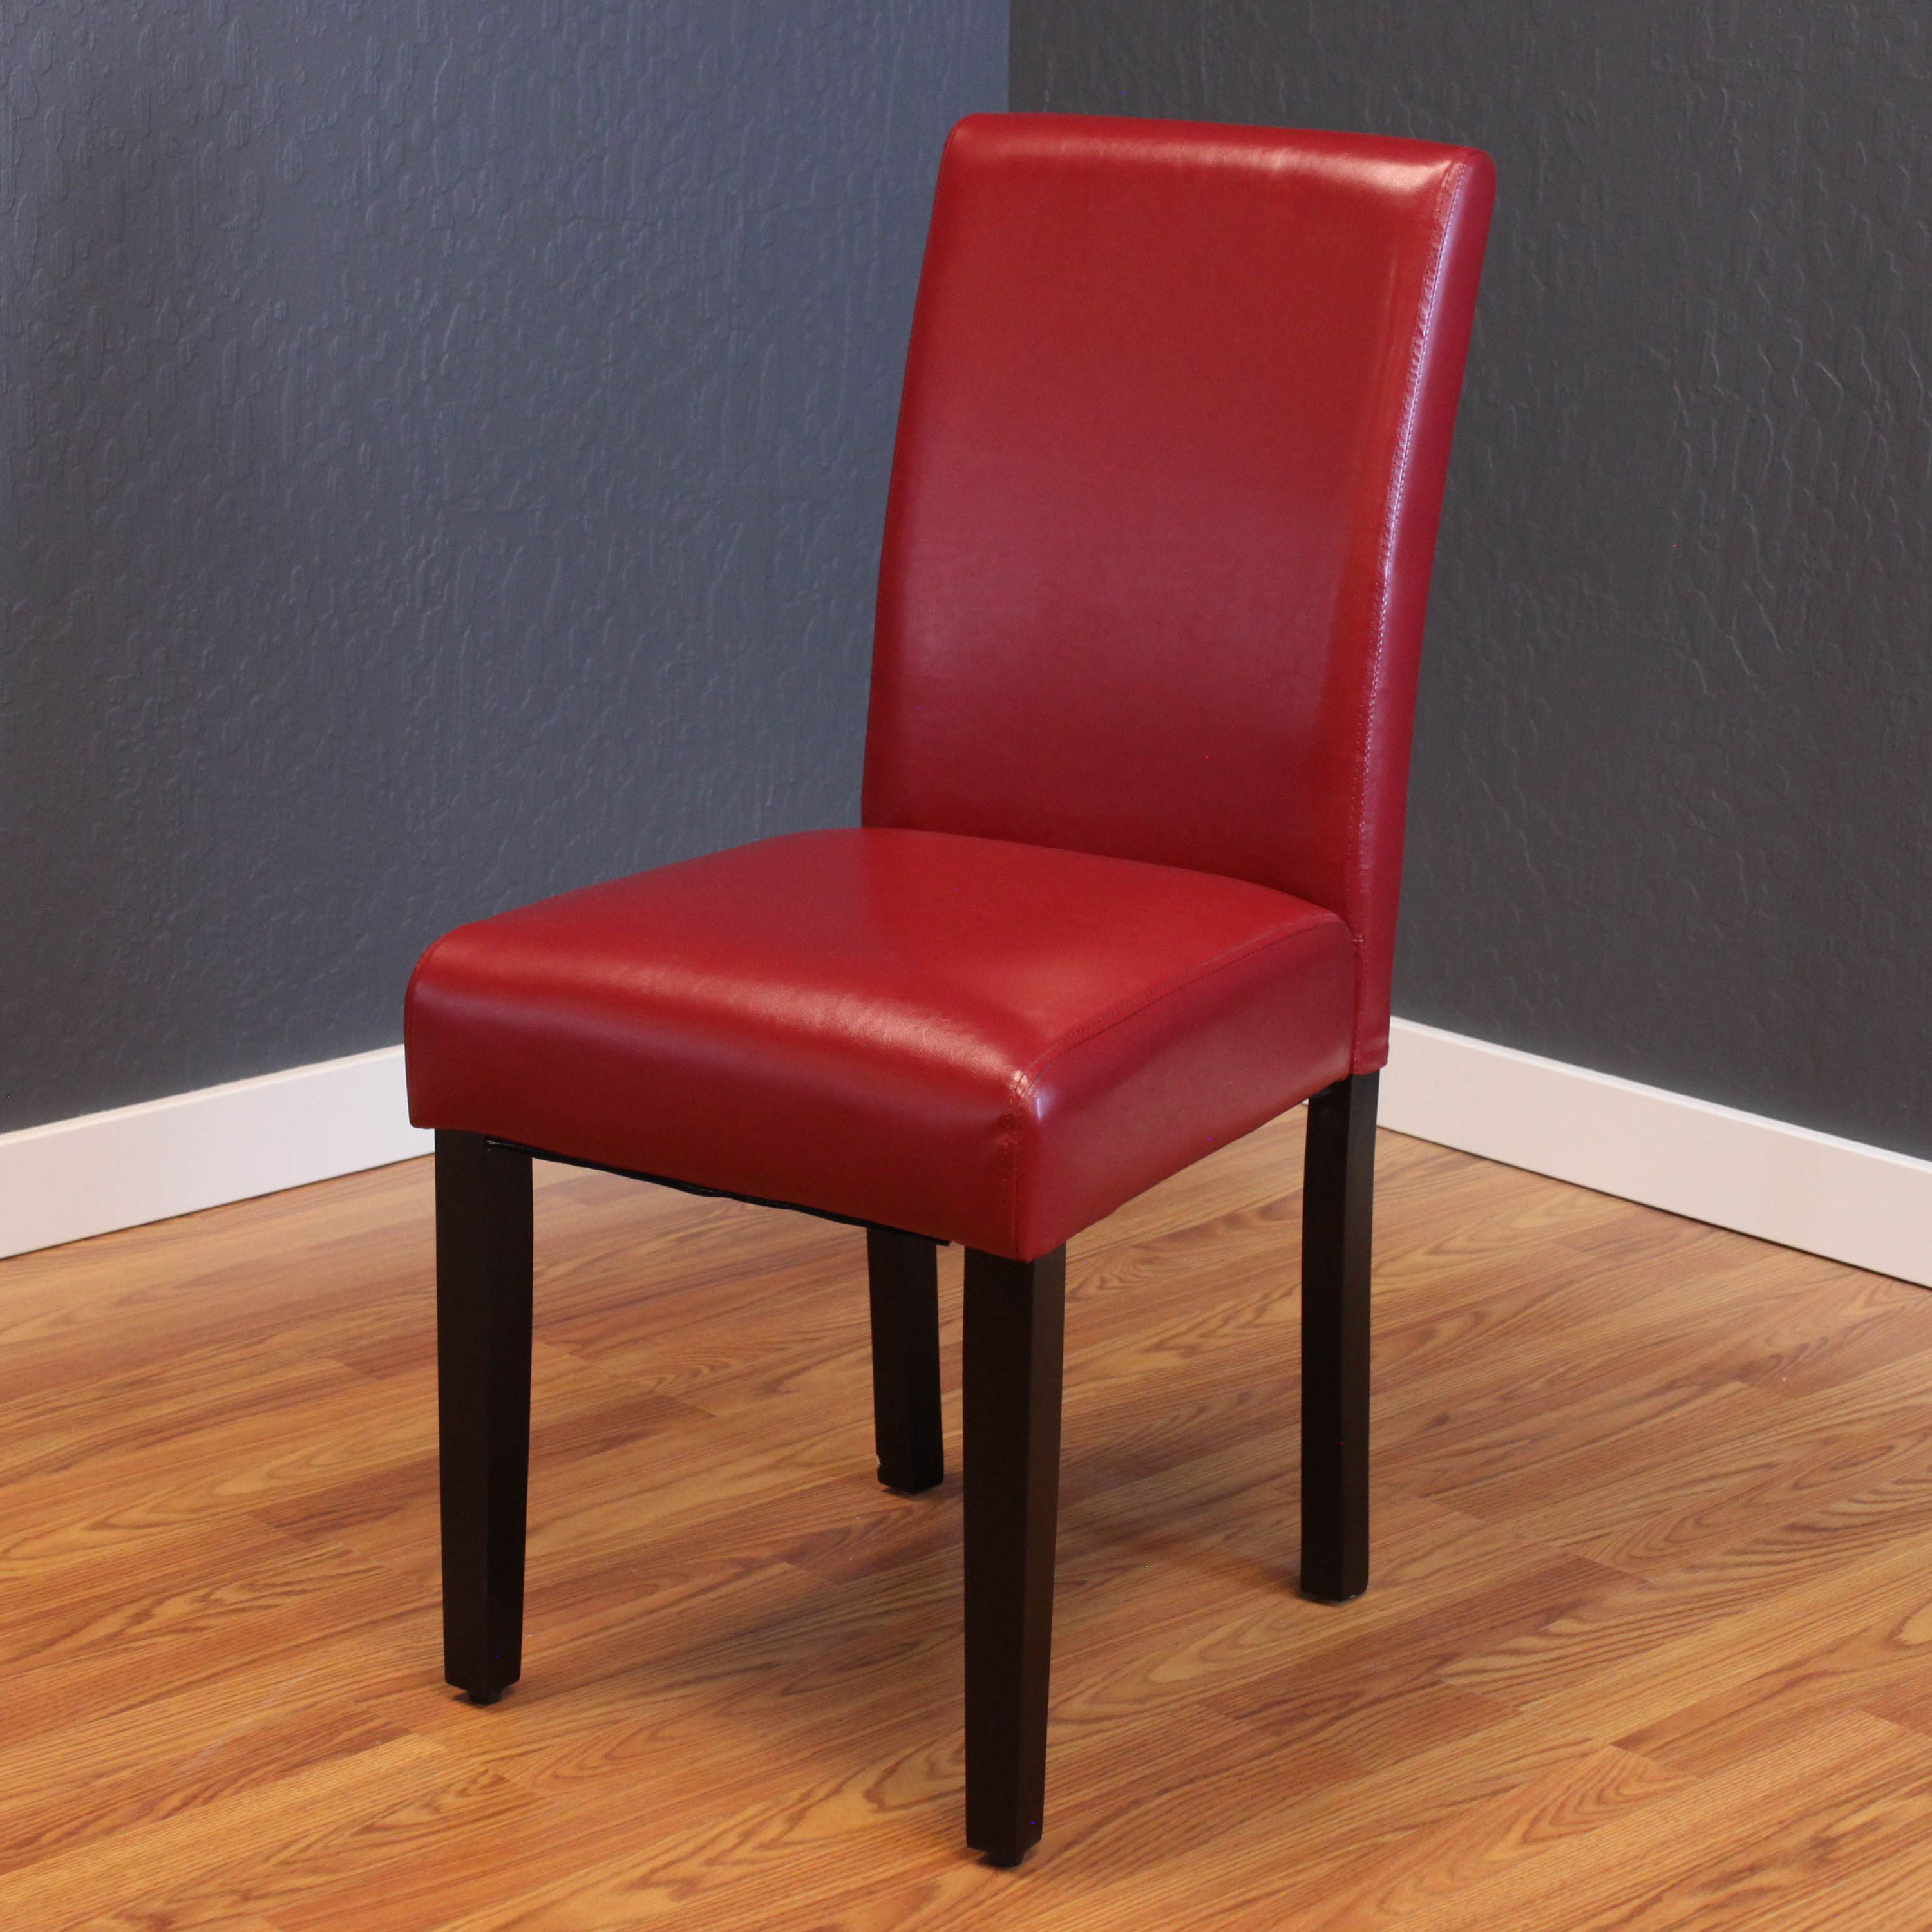 Mai Faux Leather Red Dining Chairs (Set of 2) - Walmart.com - Walmart.com